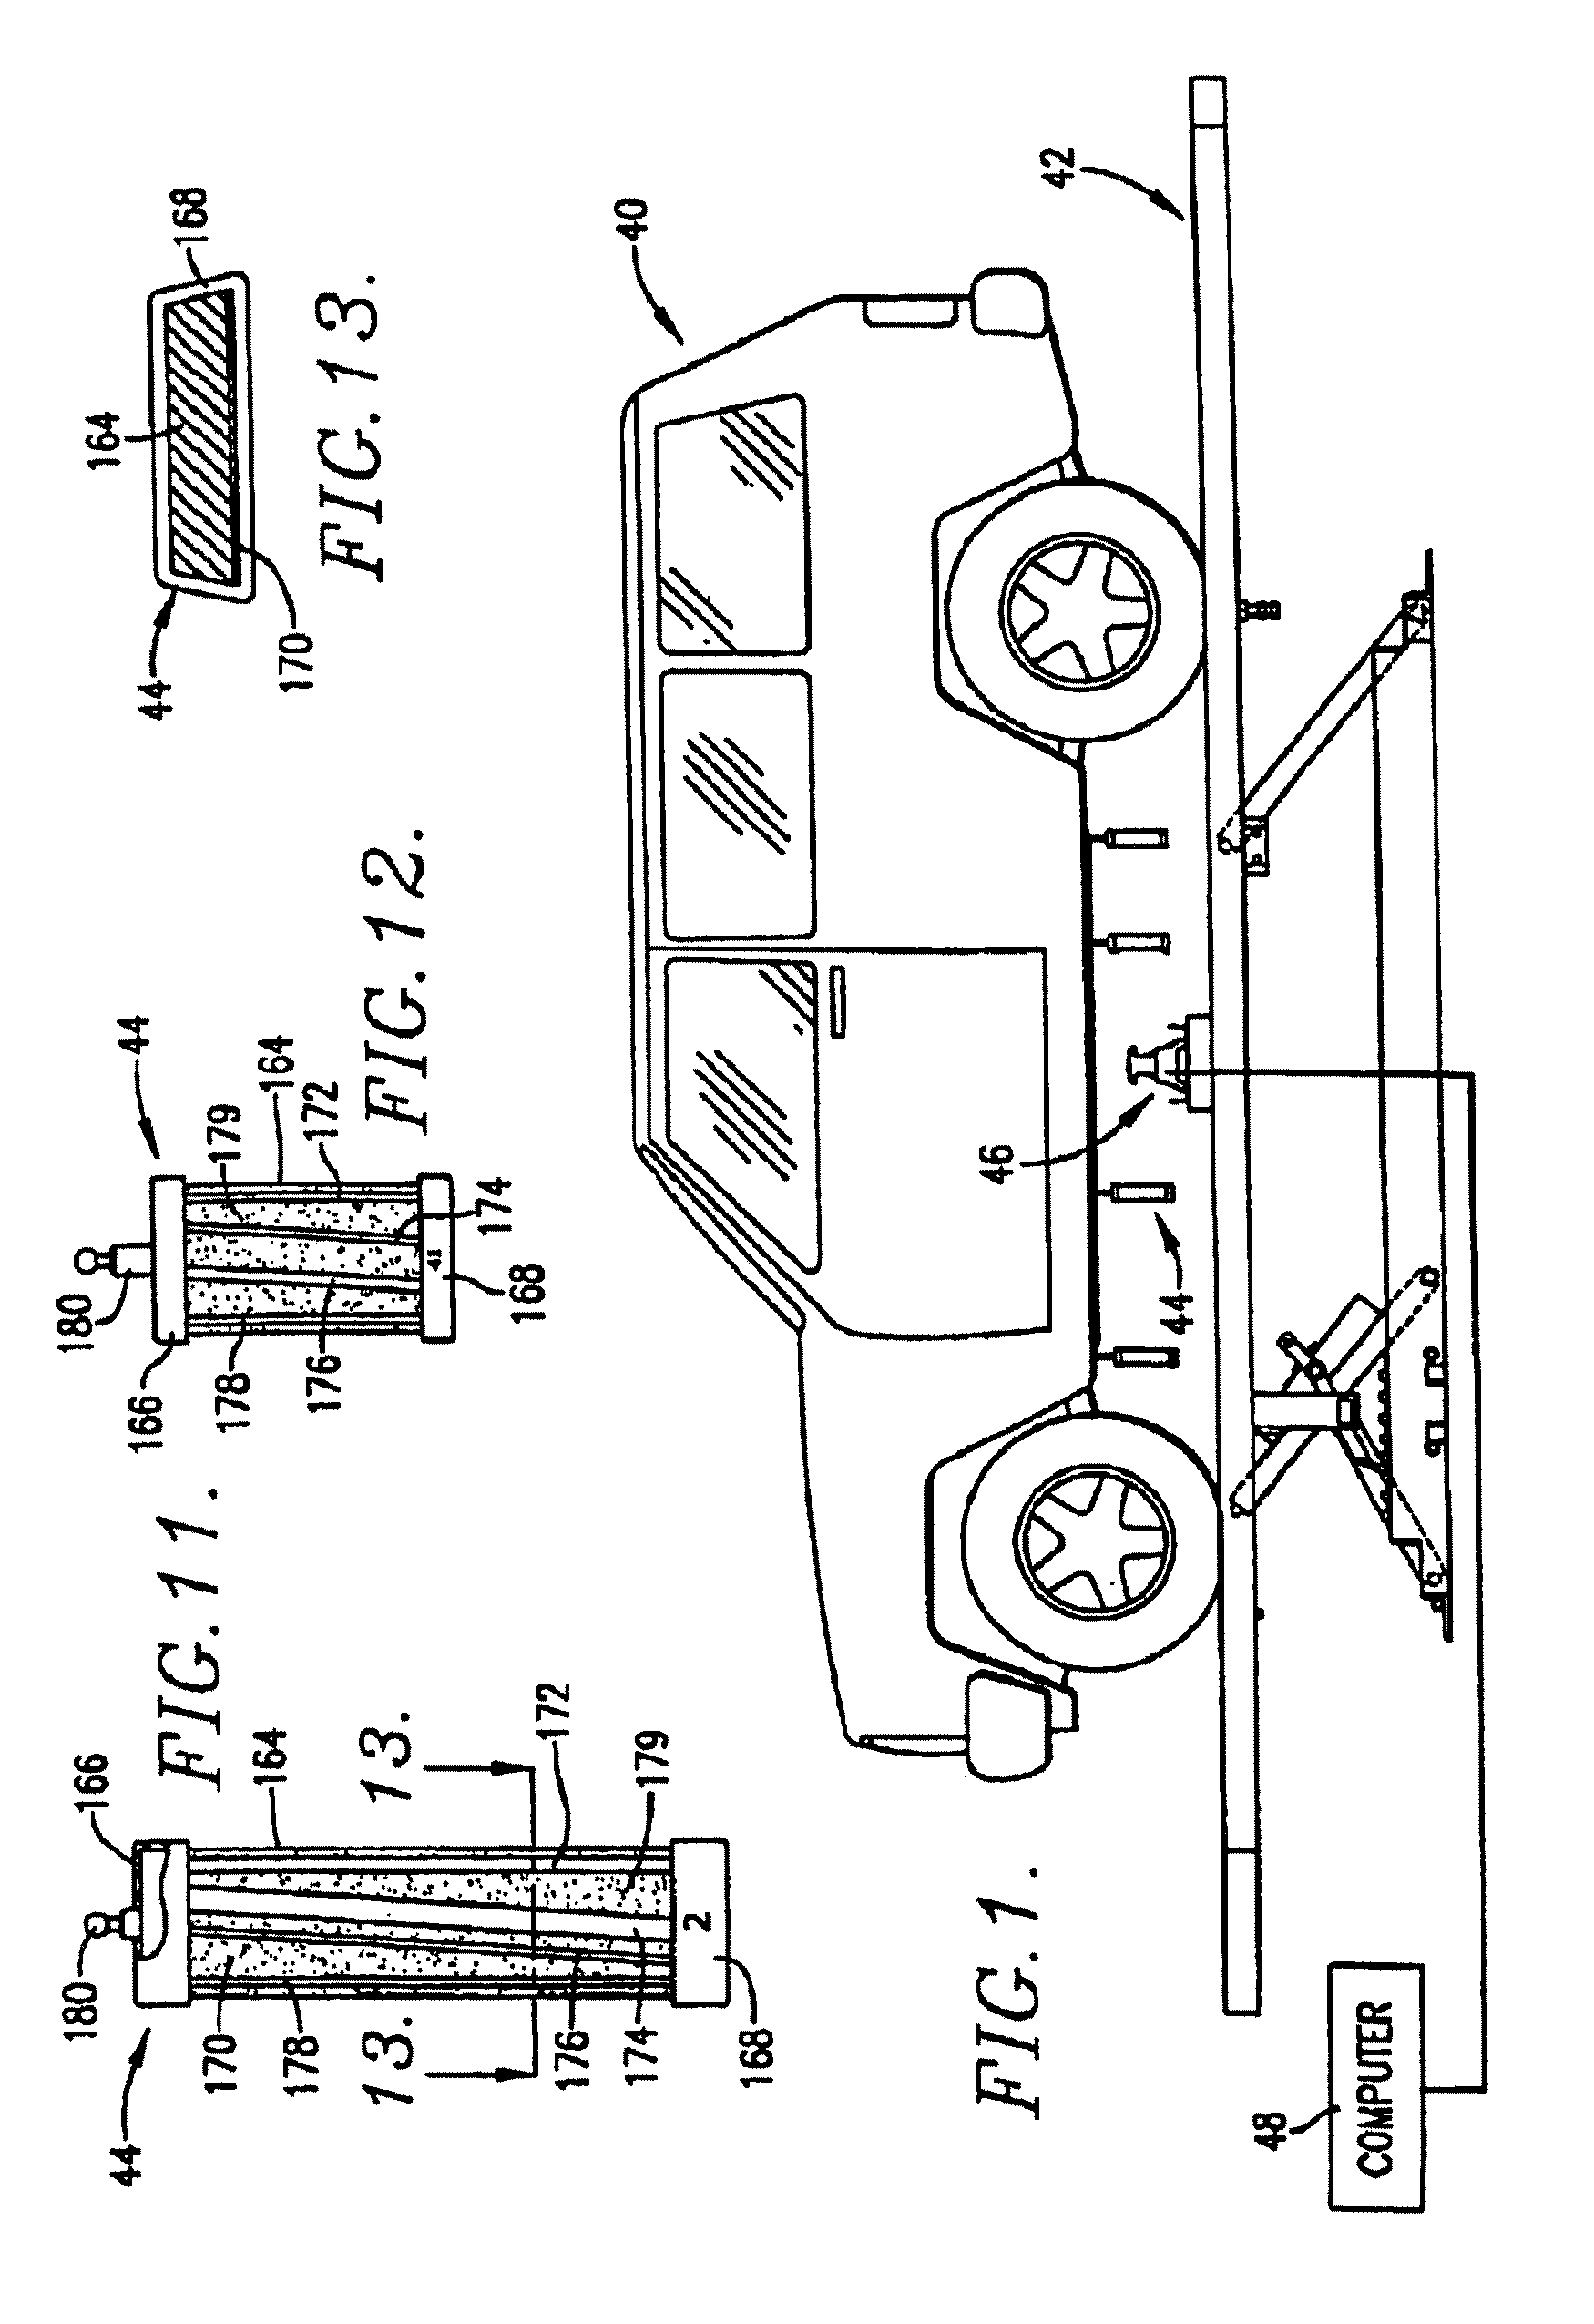 Laser scanning apparatus with improved optical features